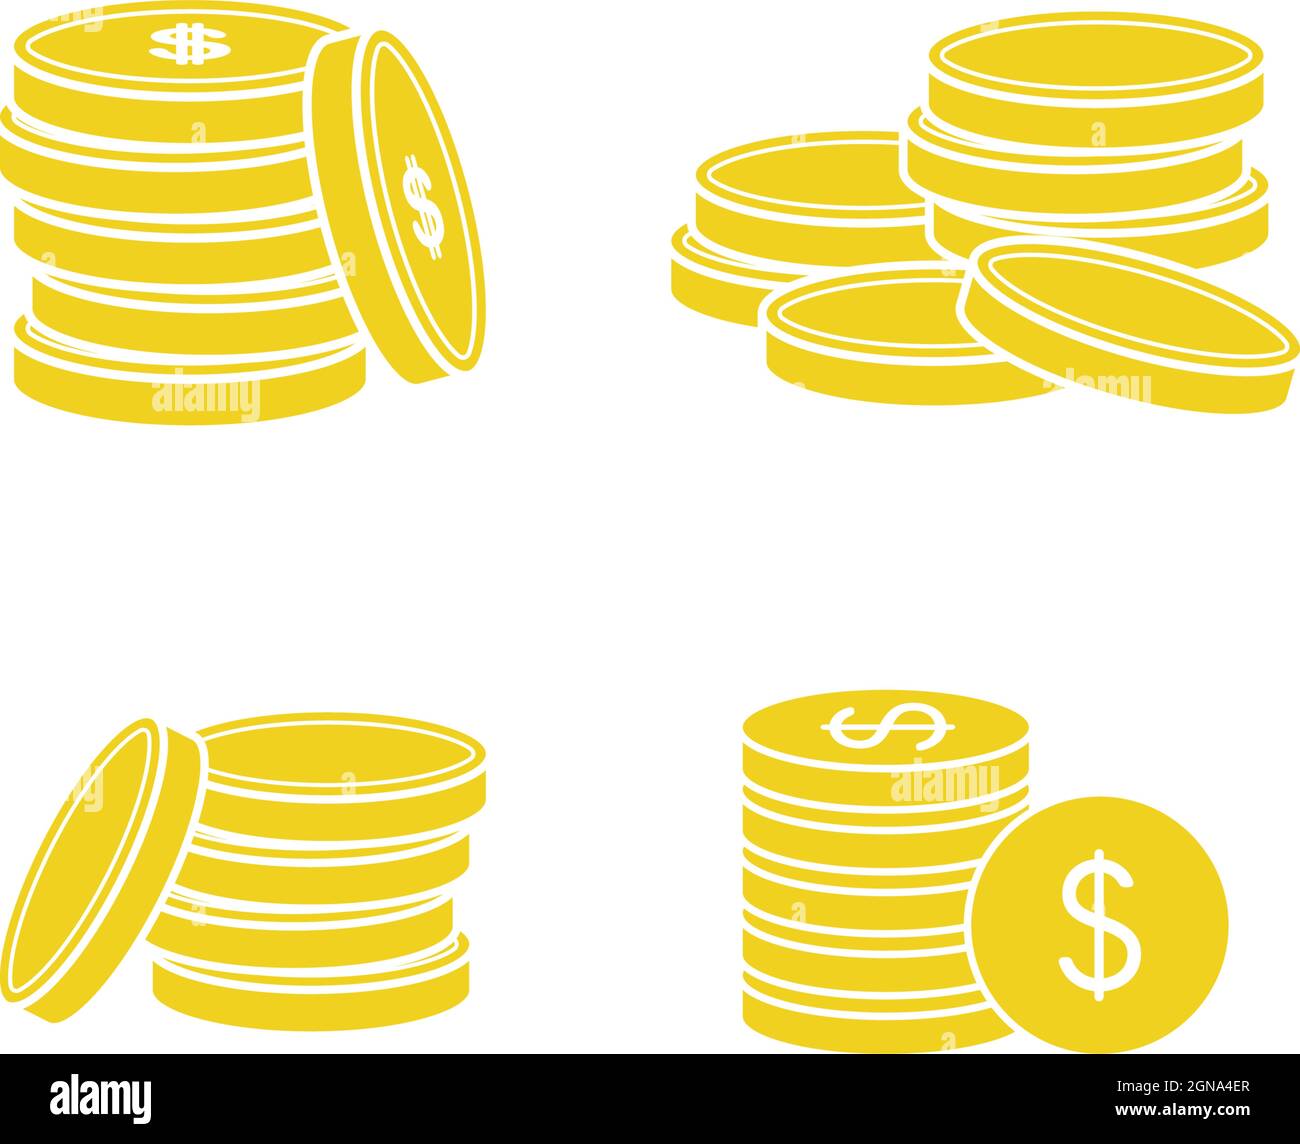 Coin stack icon set design template illustration isolated Stock Vector